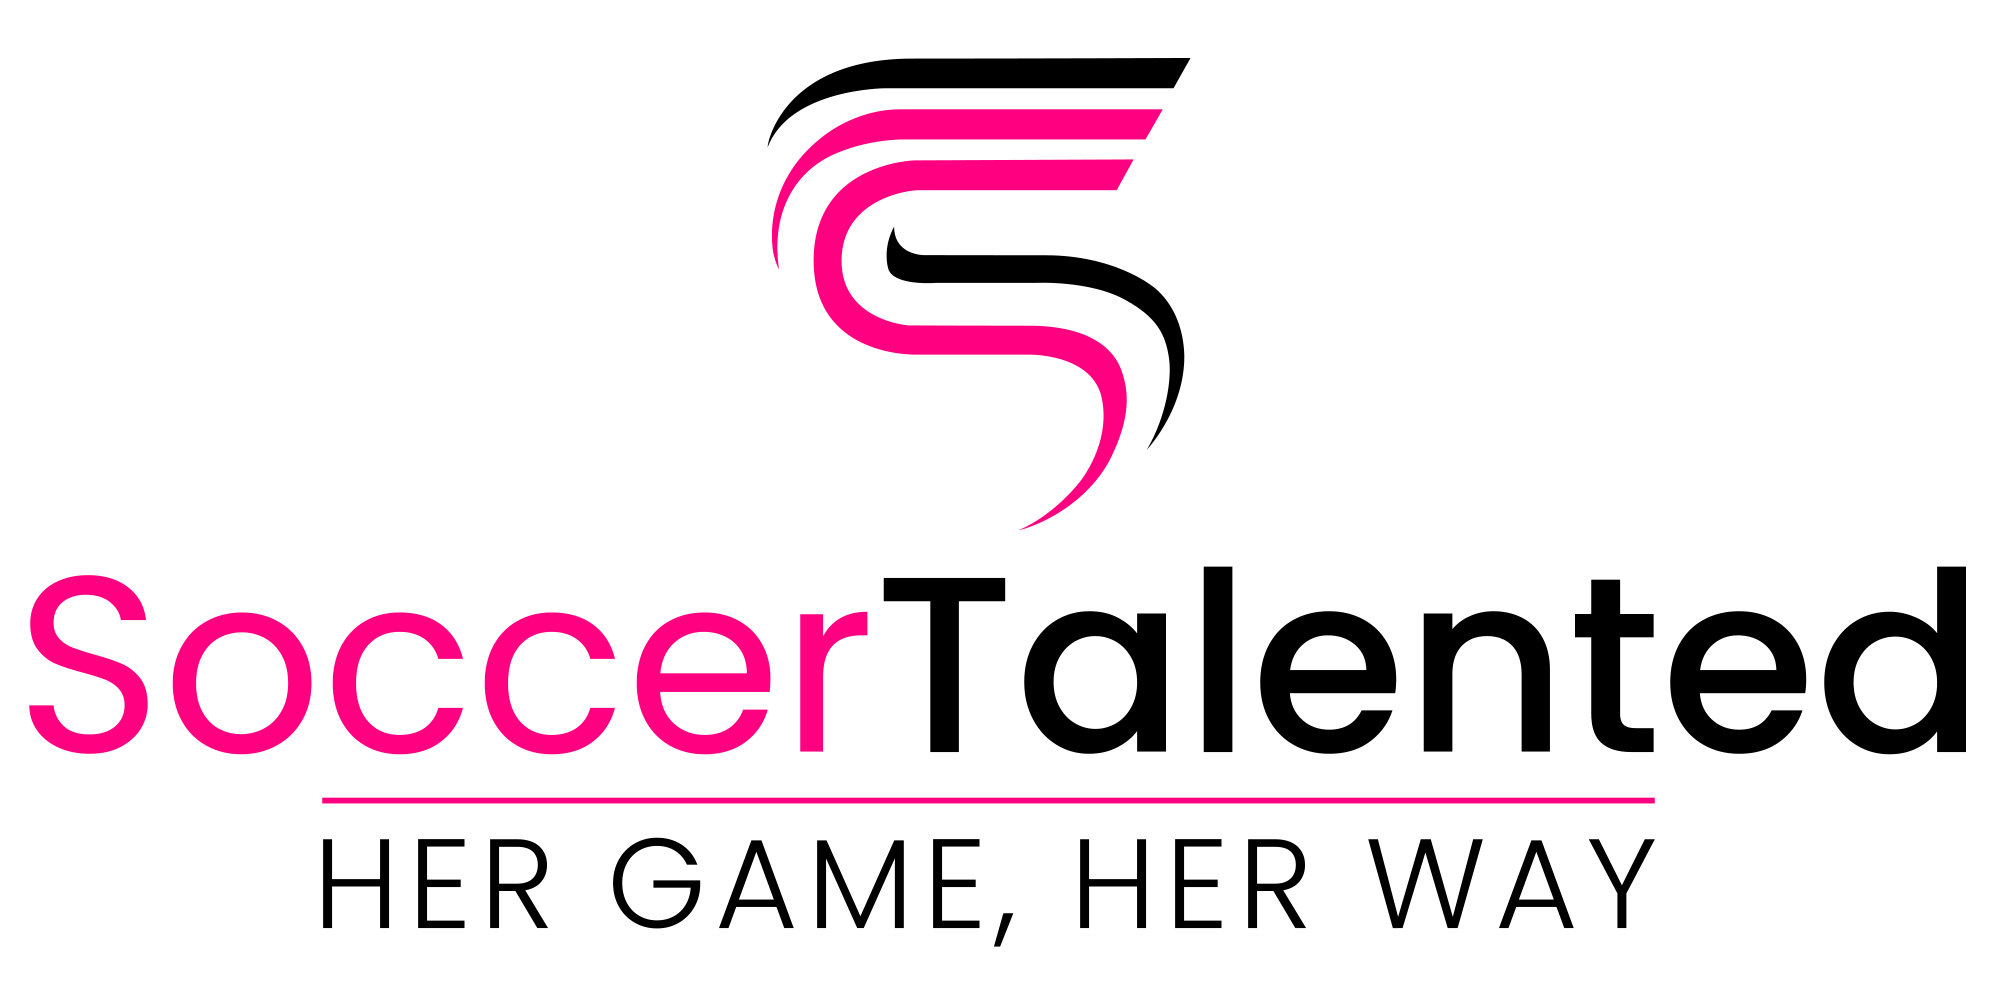 Soccer Talented logo, word 'Soccer' in pink, 'Talented' in black, tagline 'Her Game, Her Way' in black underneath.